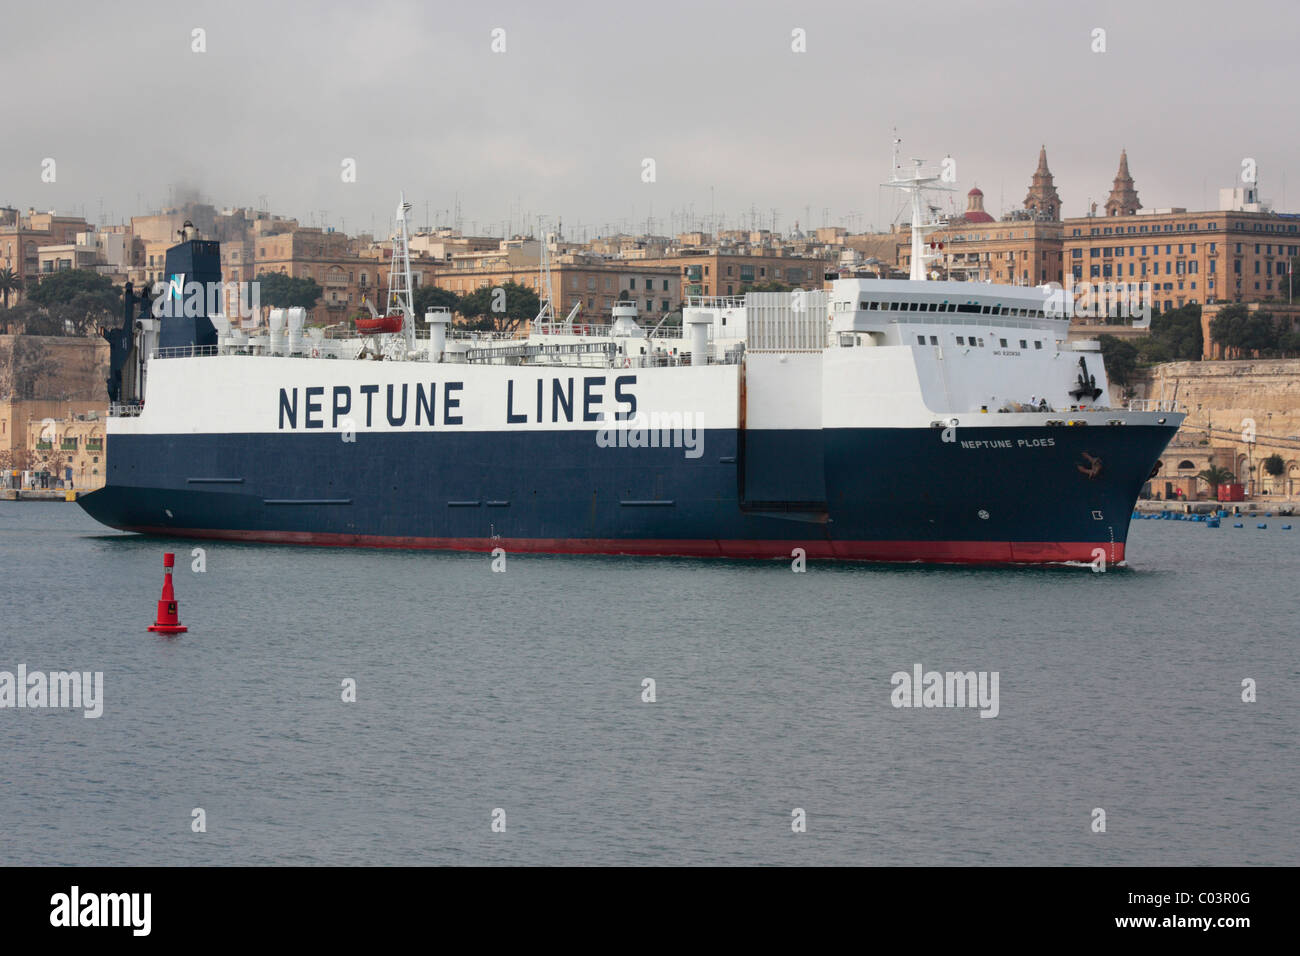 The pure car truck carrier Neptune Ploes departing from Malta Stock Photo